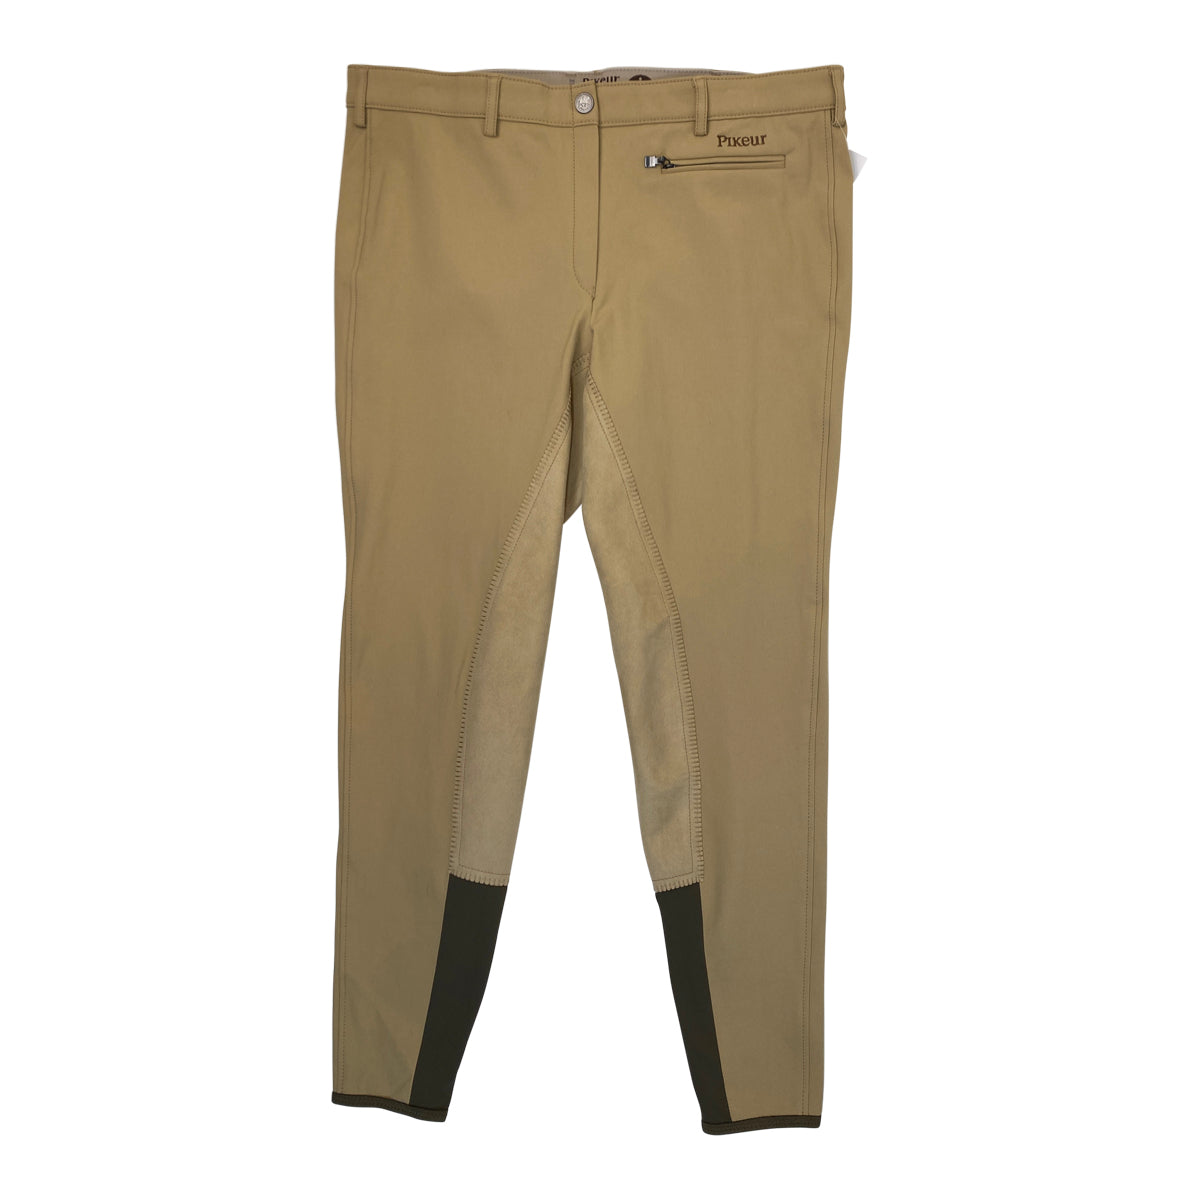 Pikeur 'Lugana Stretch' Full Seat Breeches in Sand